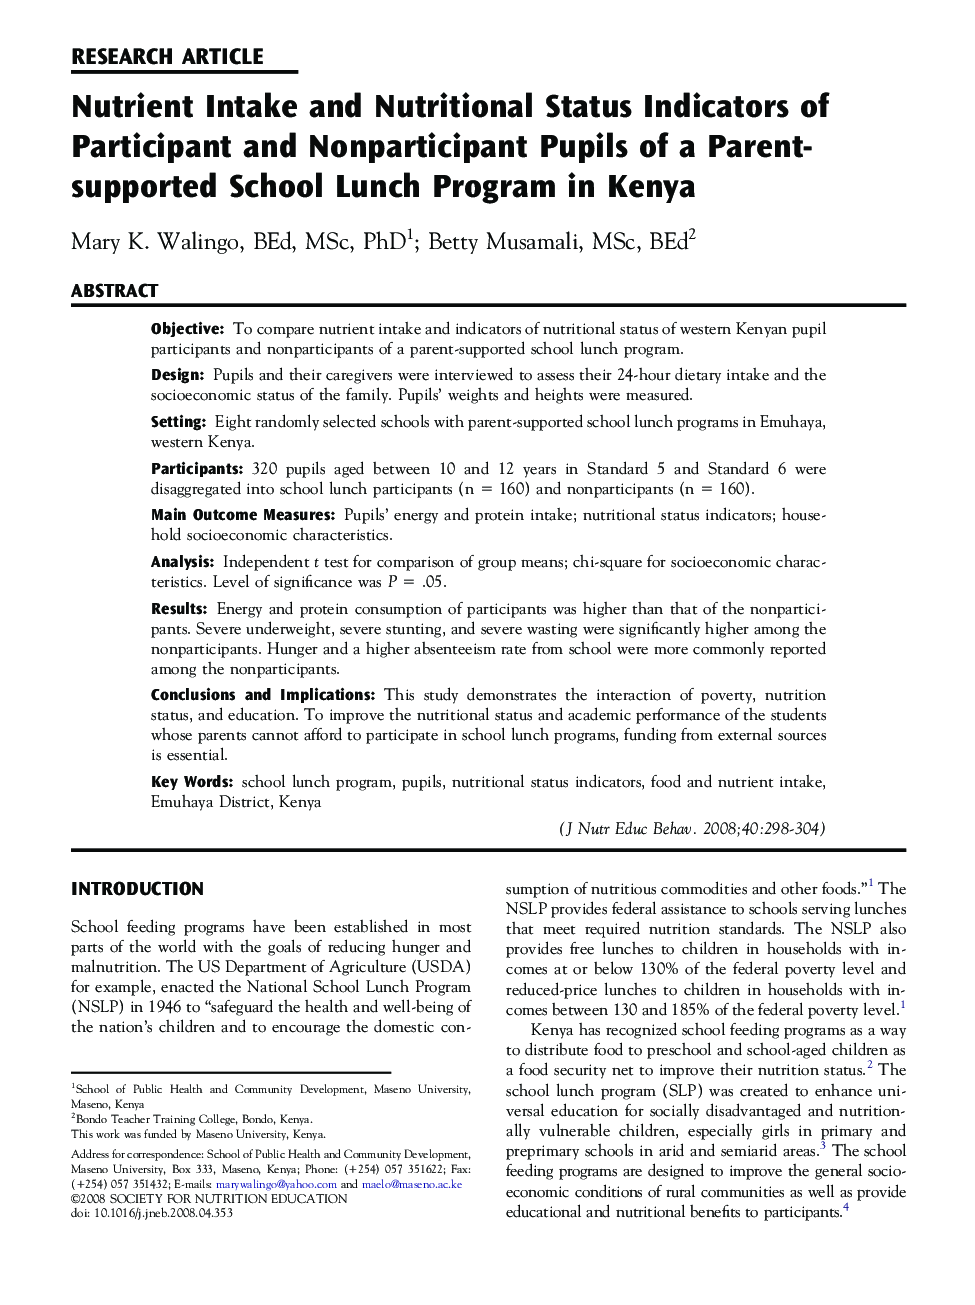 Nutrient Intake and Nutritional Status Indicators of Participant and Nonparticipant Pupils of a Parent-supported School Lunch Program in Kenya 